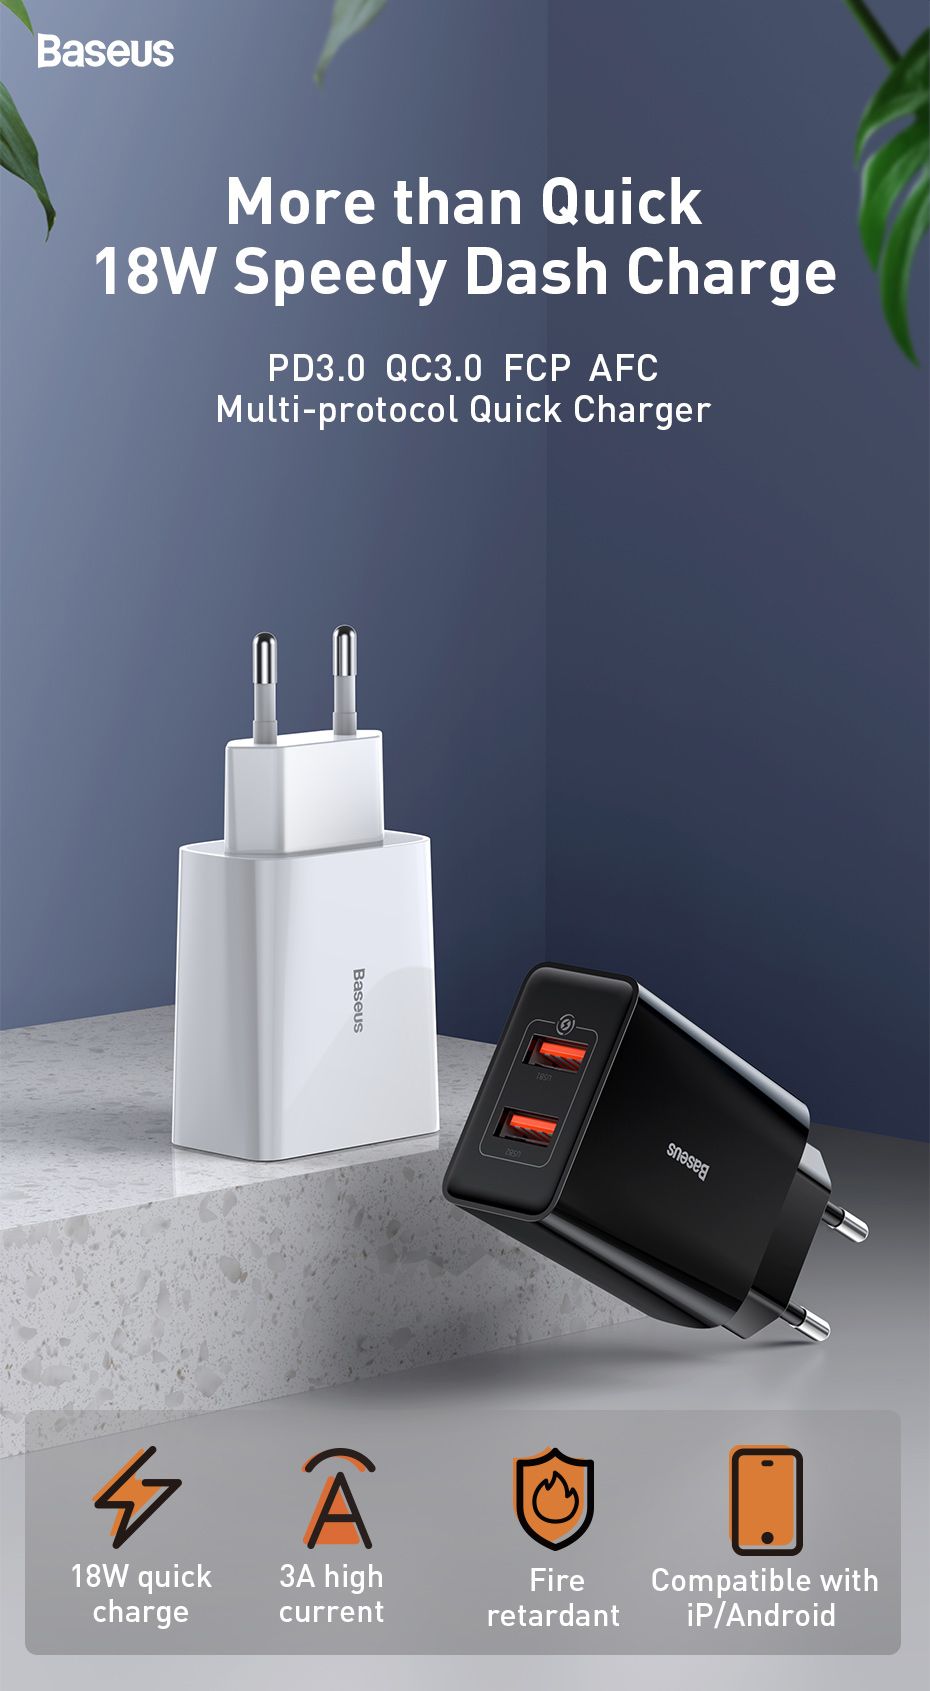 Baseus-18W-QC30-USB-Wall-Charger-SCP-AFC-Quick-Charge-EU-Plug-Single-Port-Phone-Charger-For-Smart-Ph-1695469